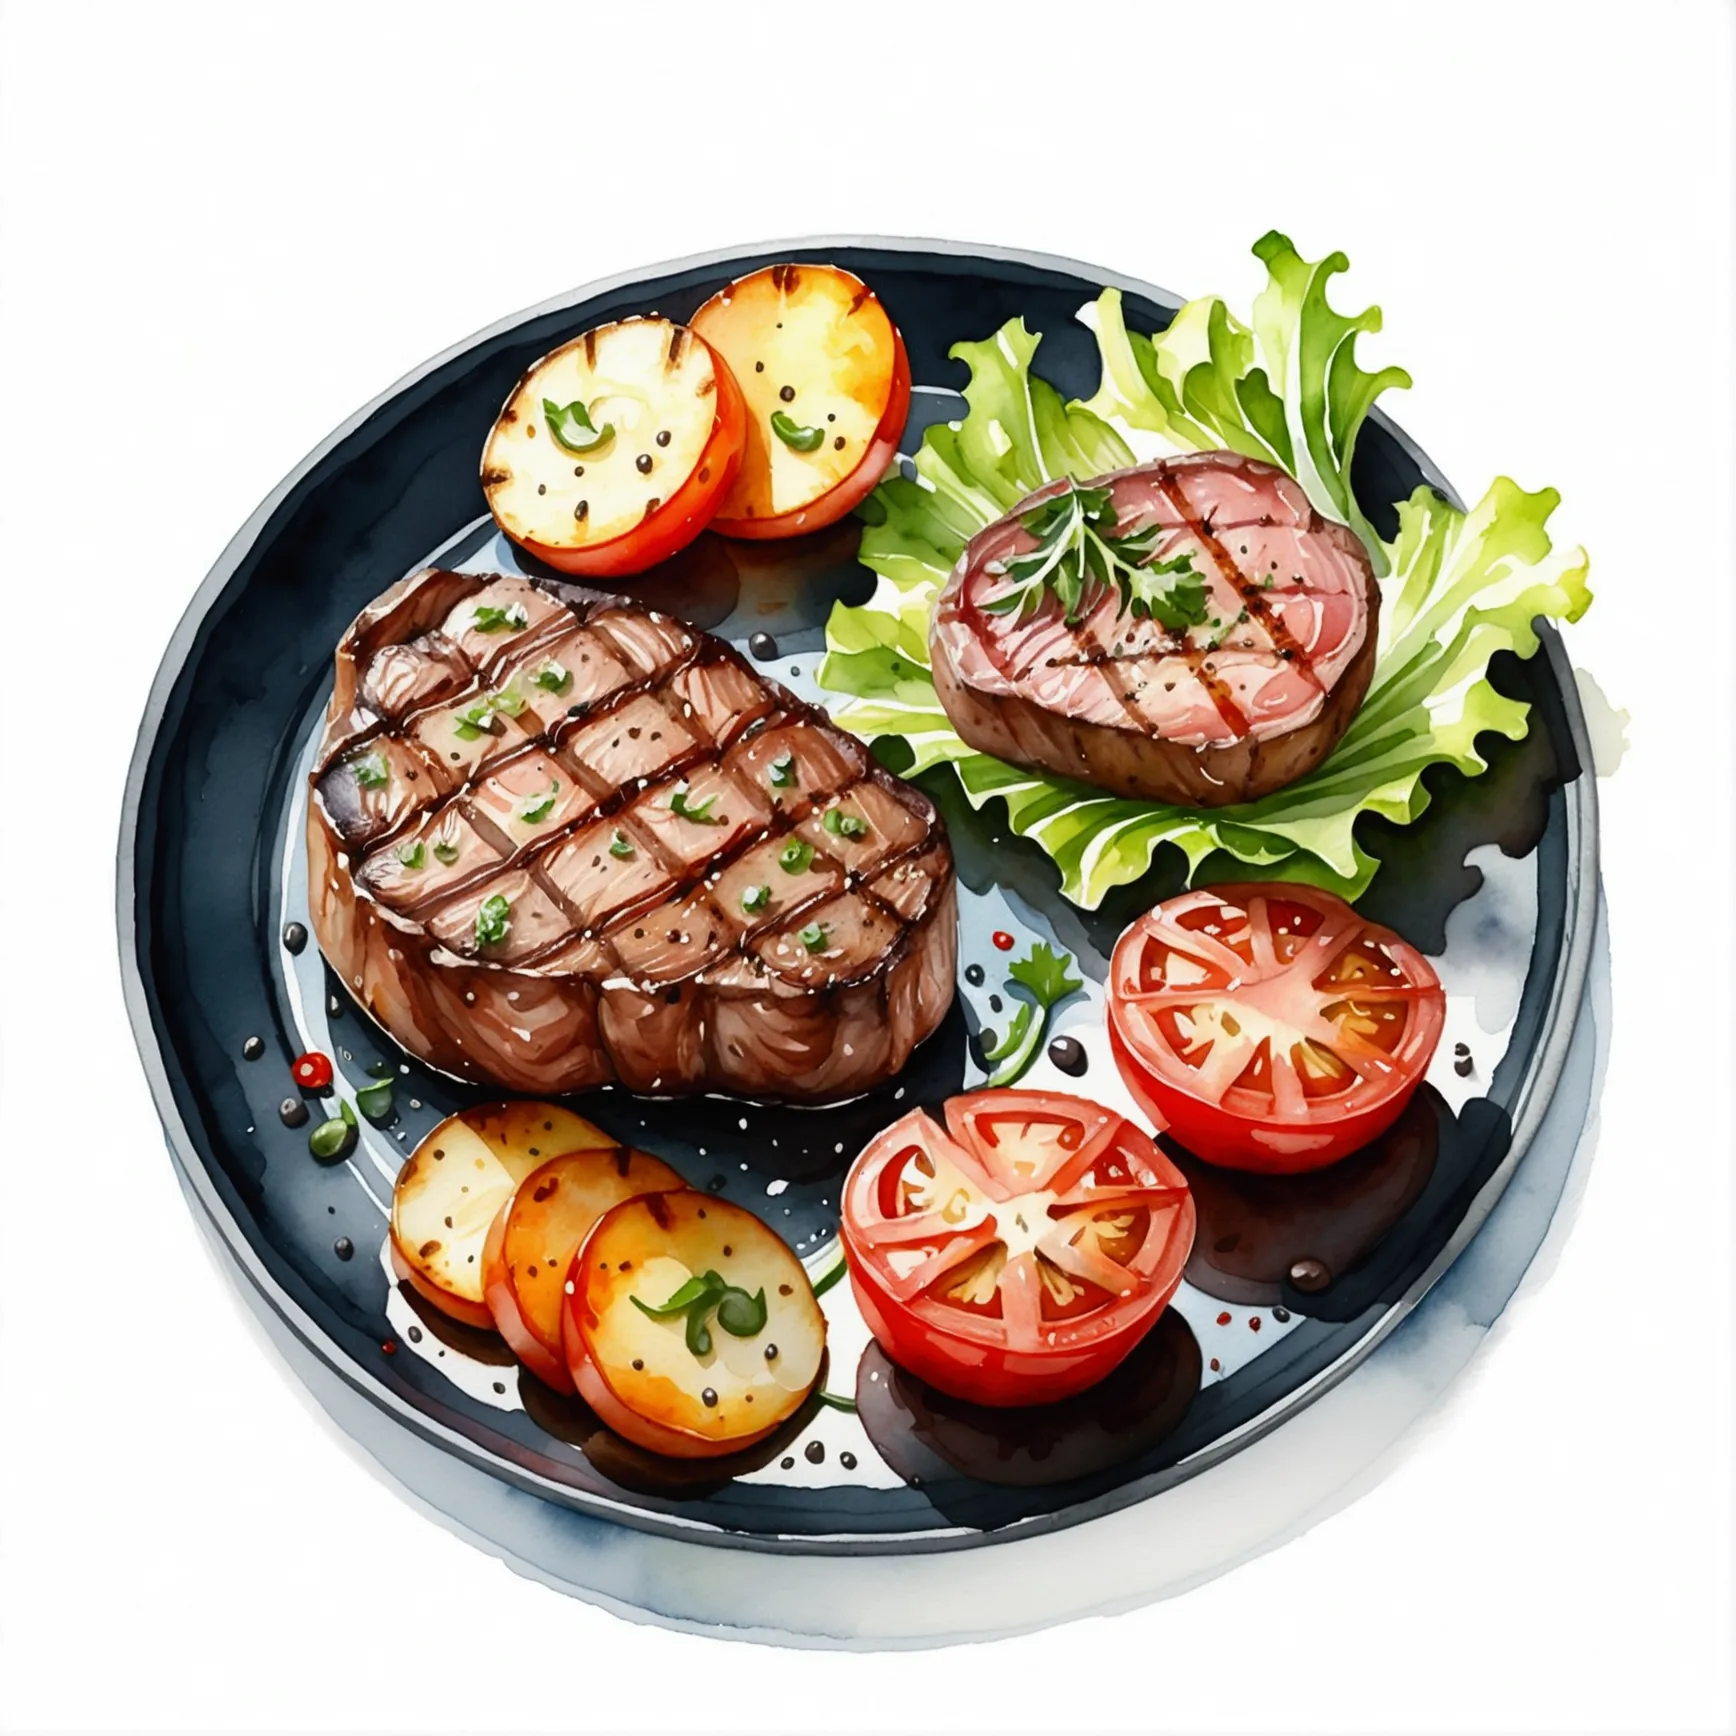 Delicious tenderloin steak and baked potato、Served with grilled tomato slices and green lettuce vegetables々Served on a black pla...